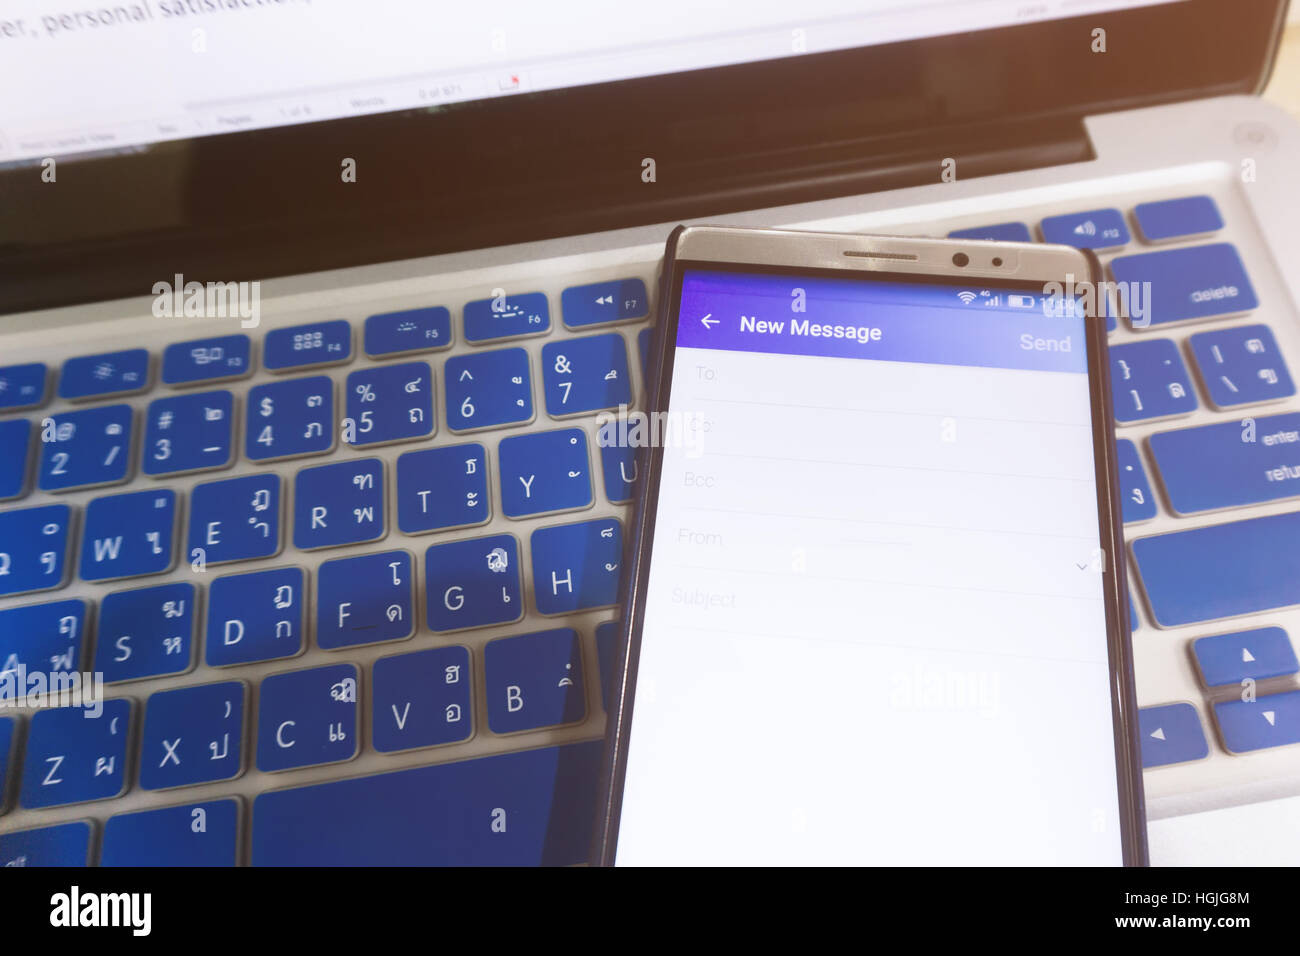 Close up Android device Showing Compose a new email application on the screen. Stock Photo